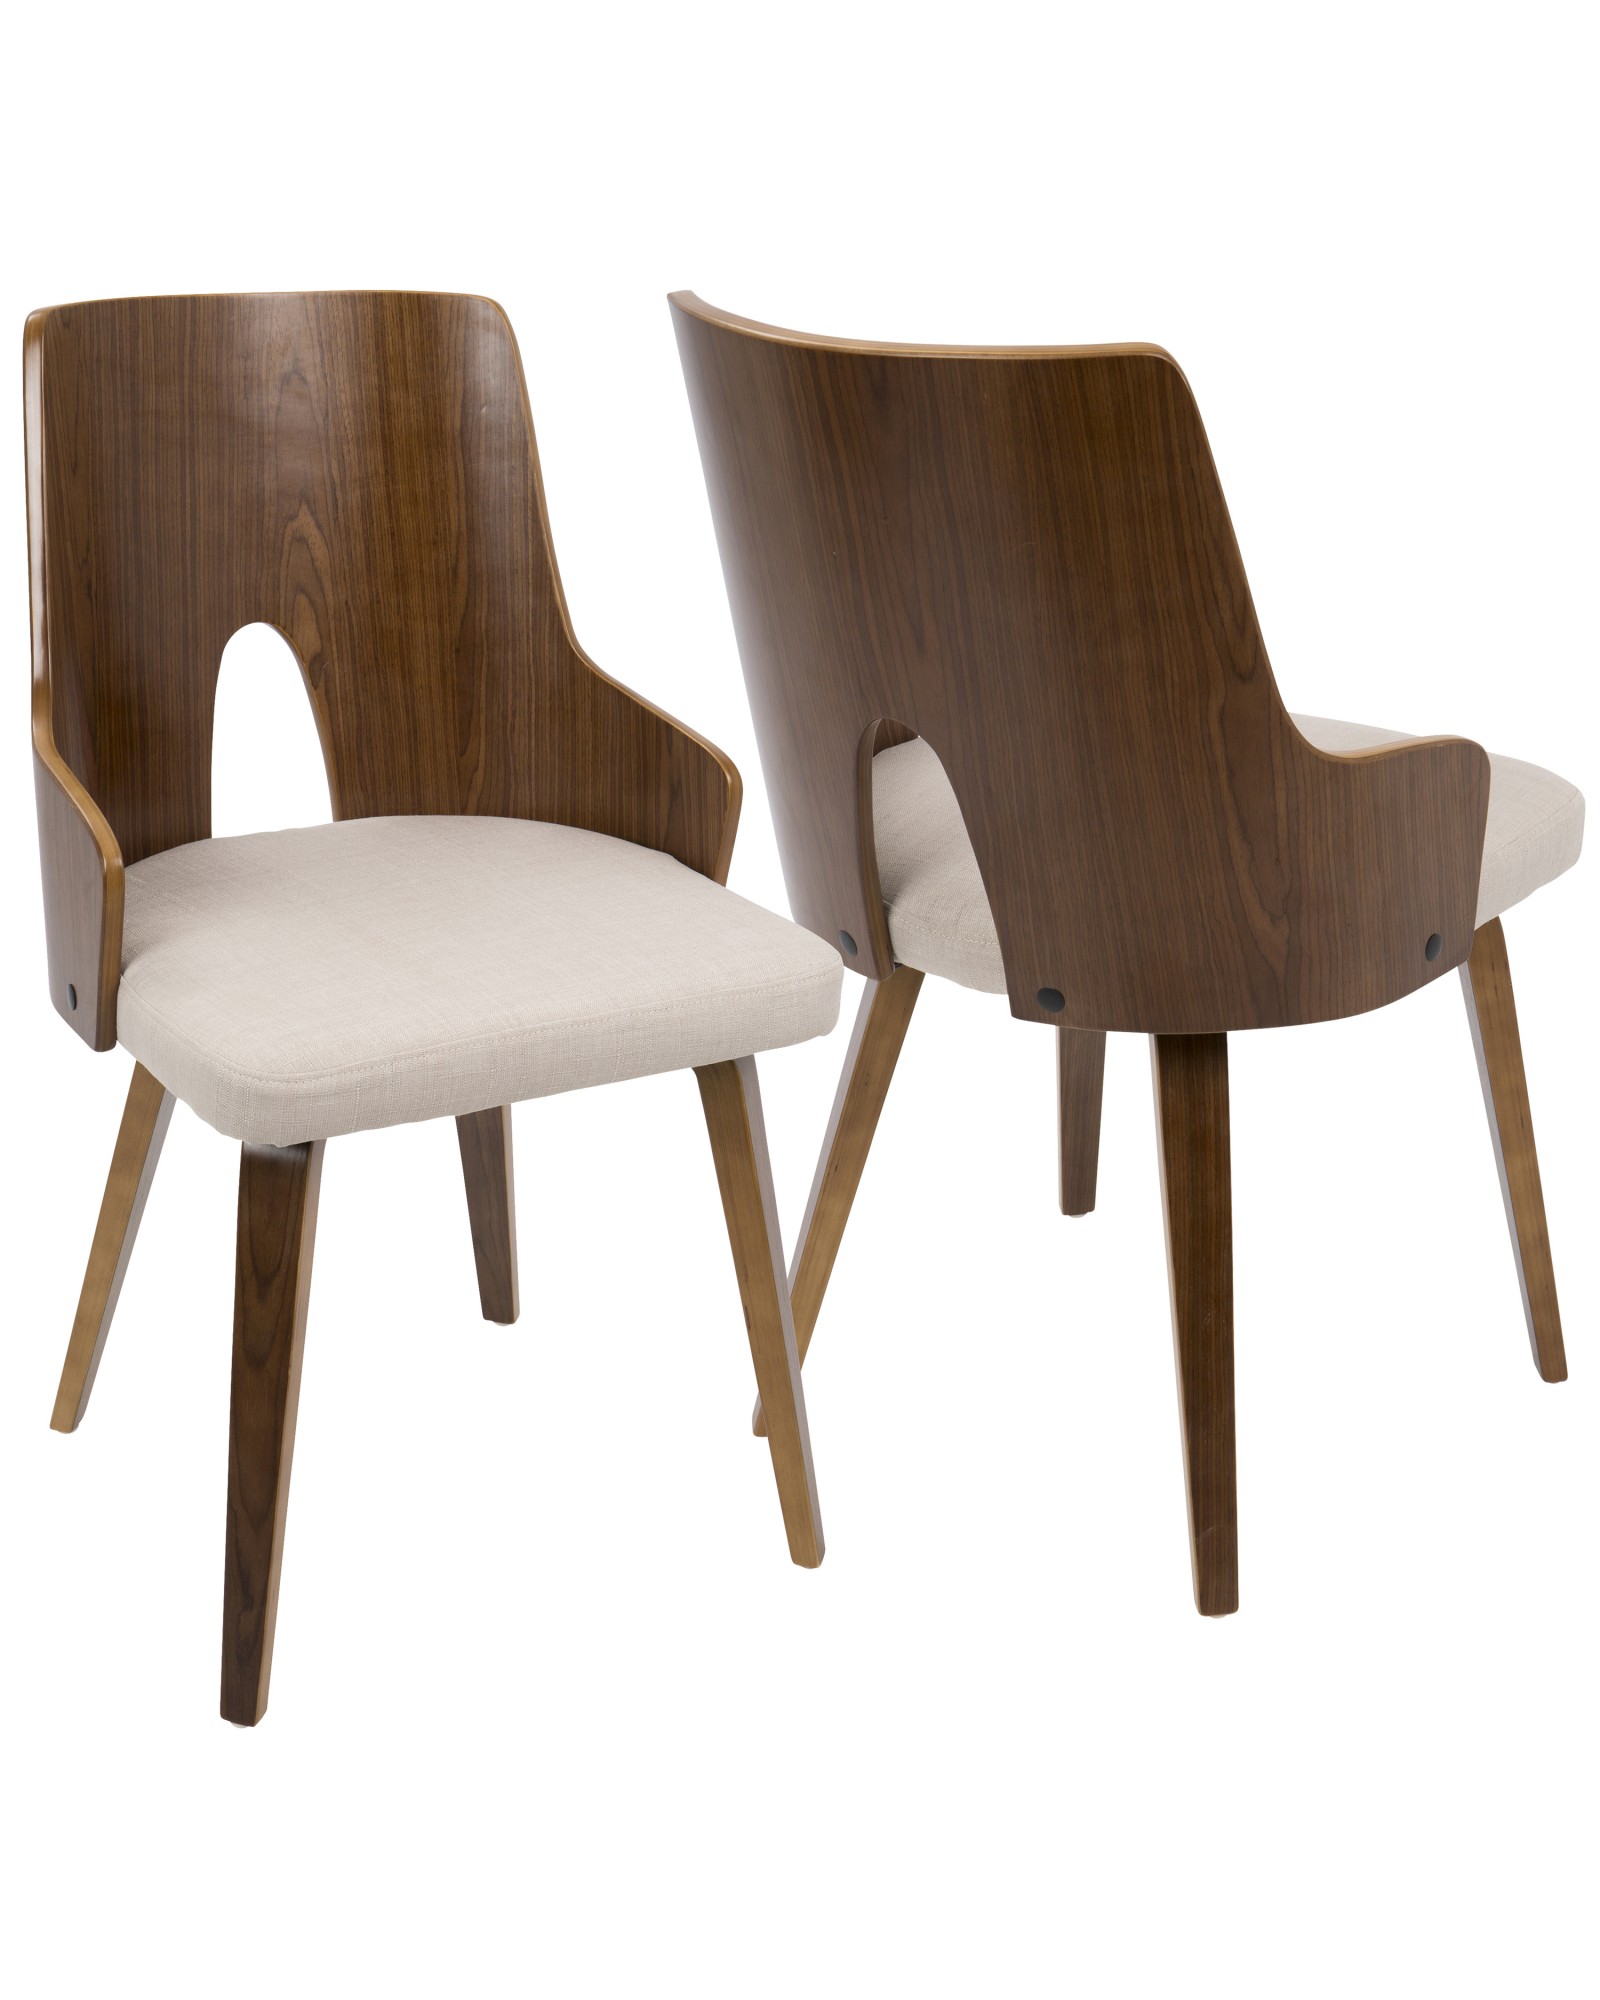 Ariana Mid-Century Modern Dining/Accent Chair in Walnut and Beige Fabric - Set of 2